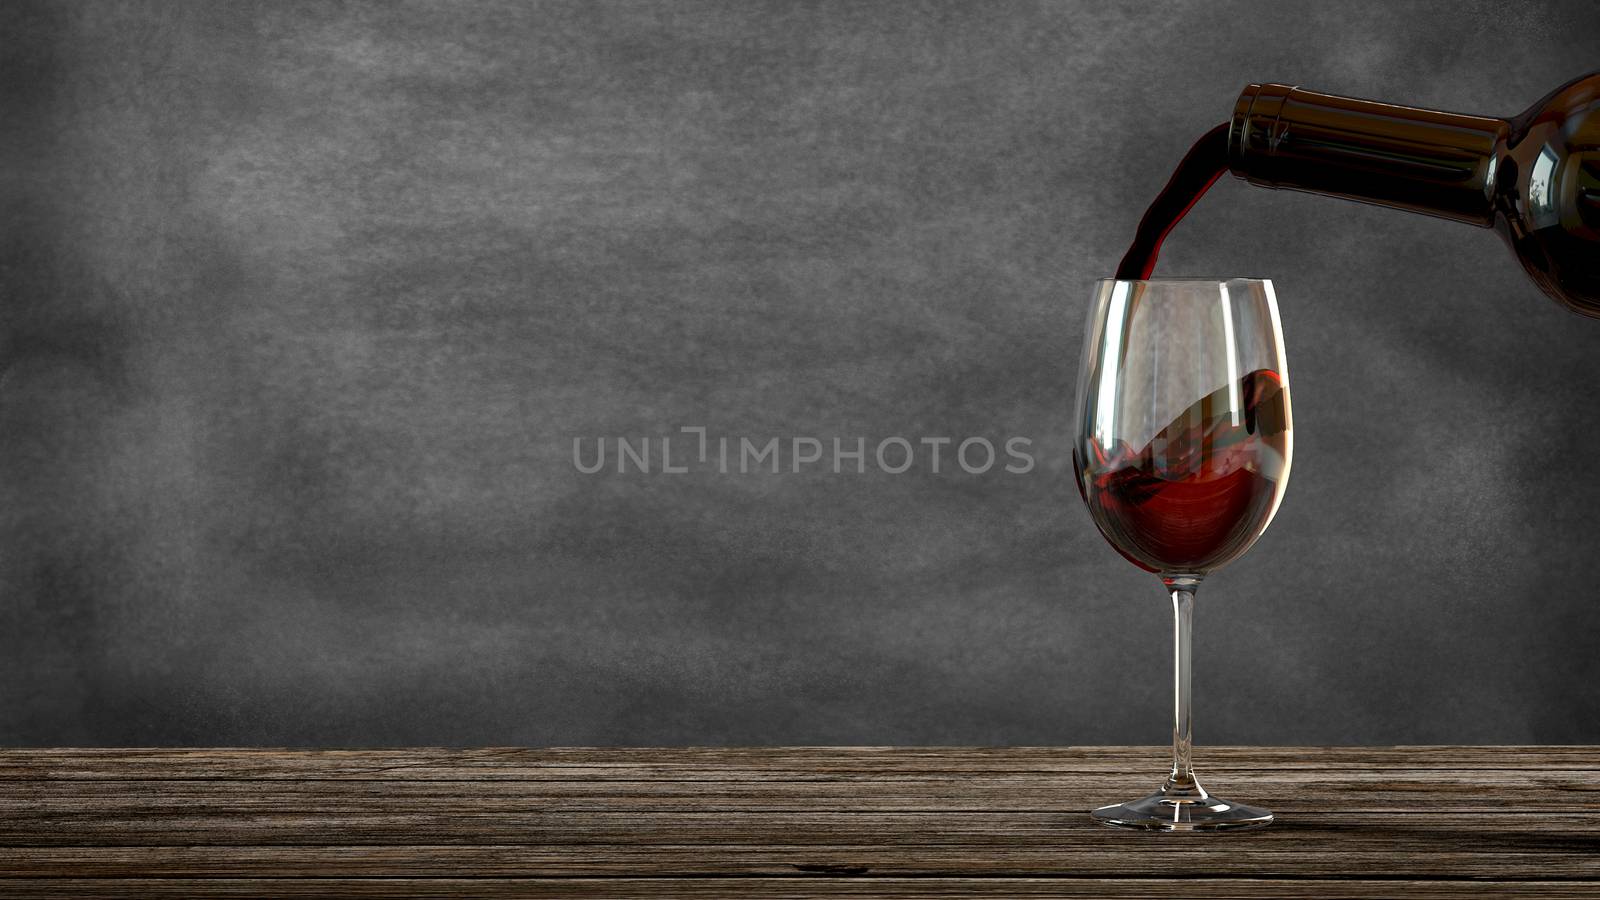 Red wine poured from a bottle into a wine glass. Blackboard background. Old wooden table. 3D rendering